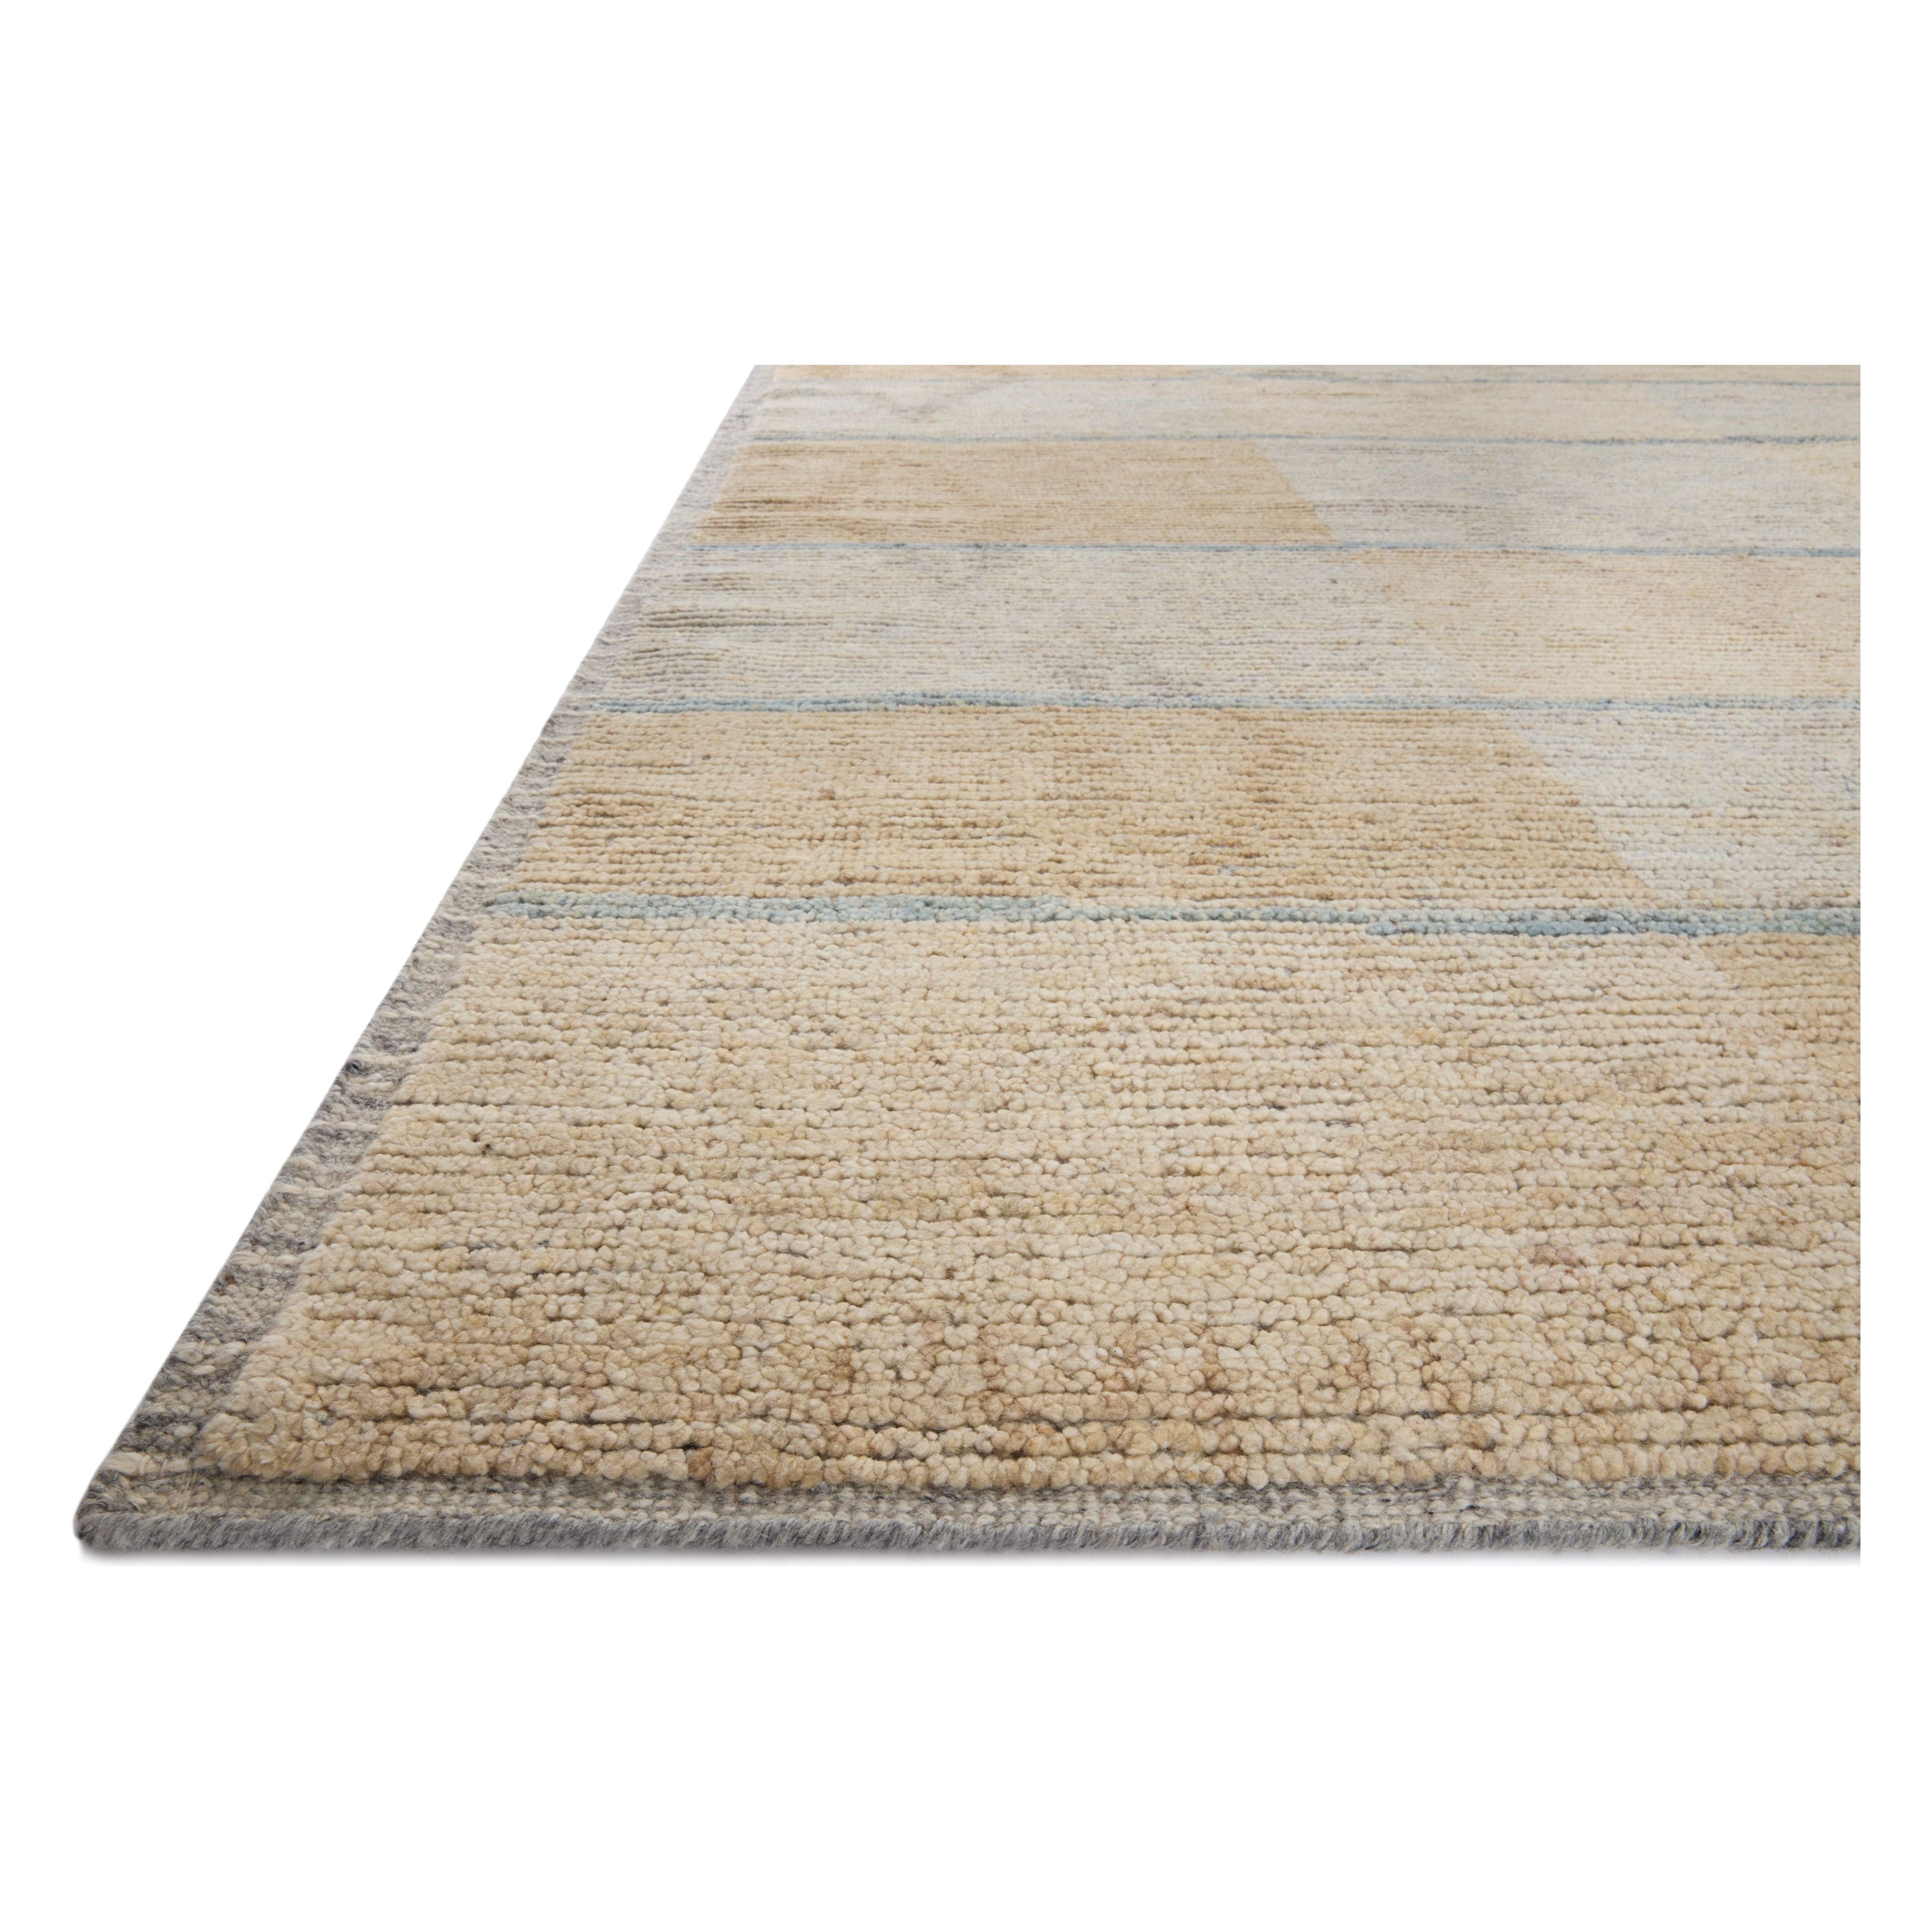 Amber Lewis x Loloi Briyana Sky / Wheat Rug combines the incredible ribbed texture of Moroccan rugs with clean, contemporary design, thanks to Lewis’s careful eye for details. Amethyst Home provides interior design services, furniture, rugs, and lighting in the Salt Lake City metro area.